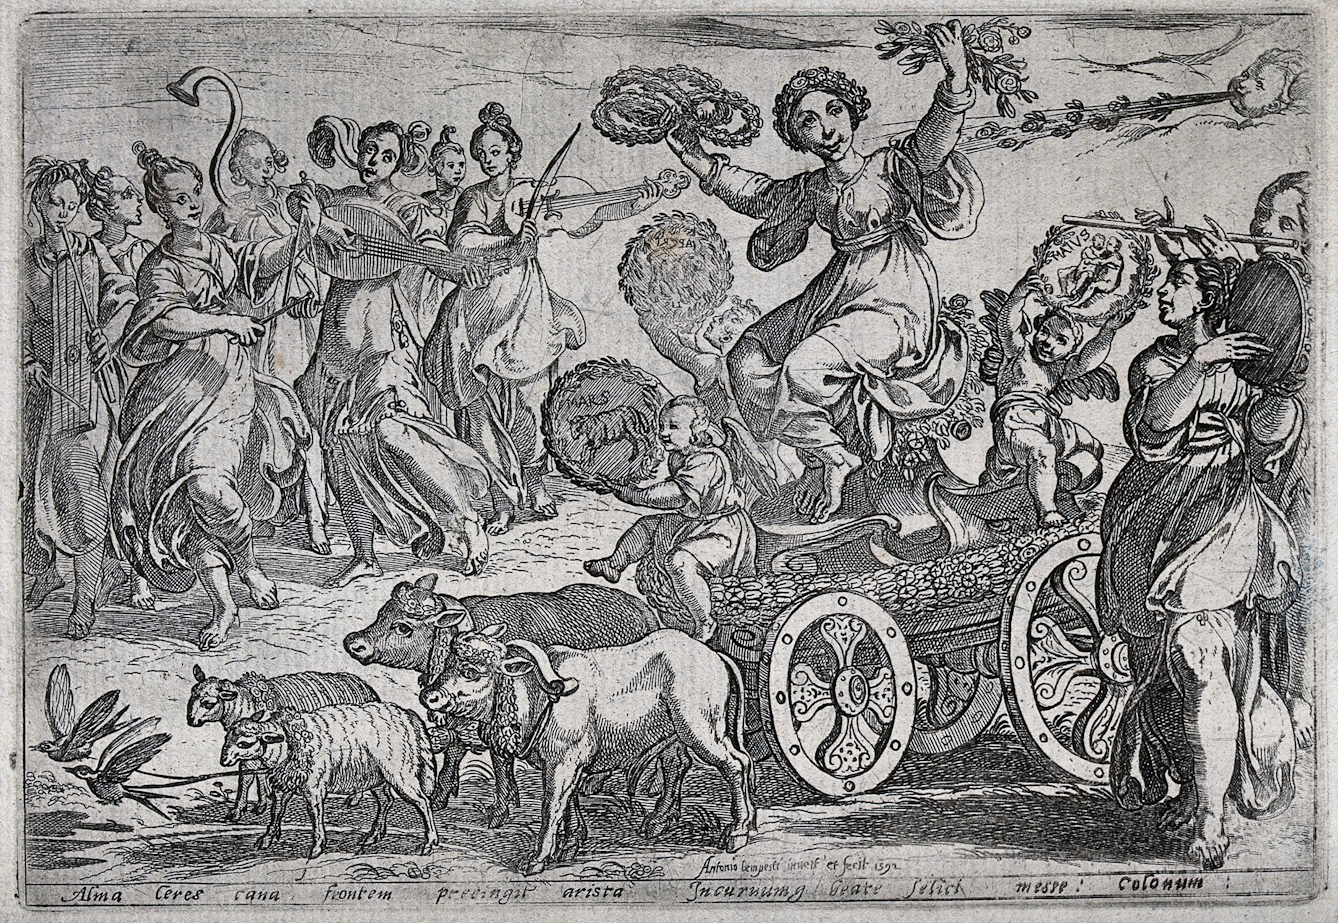 An etched illustration of a woman on a chariot drawn by farm animals, holding a wreath and flowers in her hands, surrounded by people playing musical instruments.